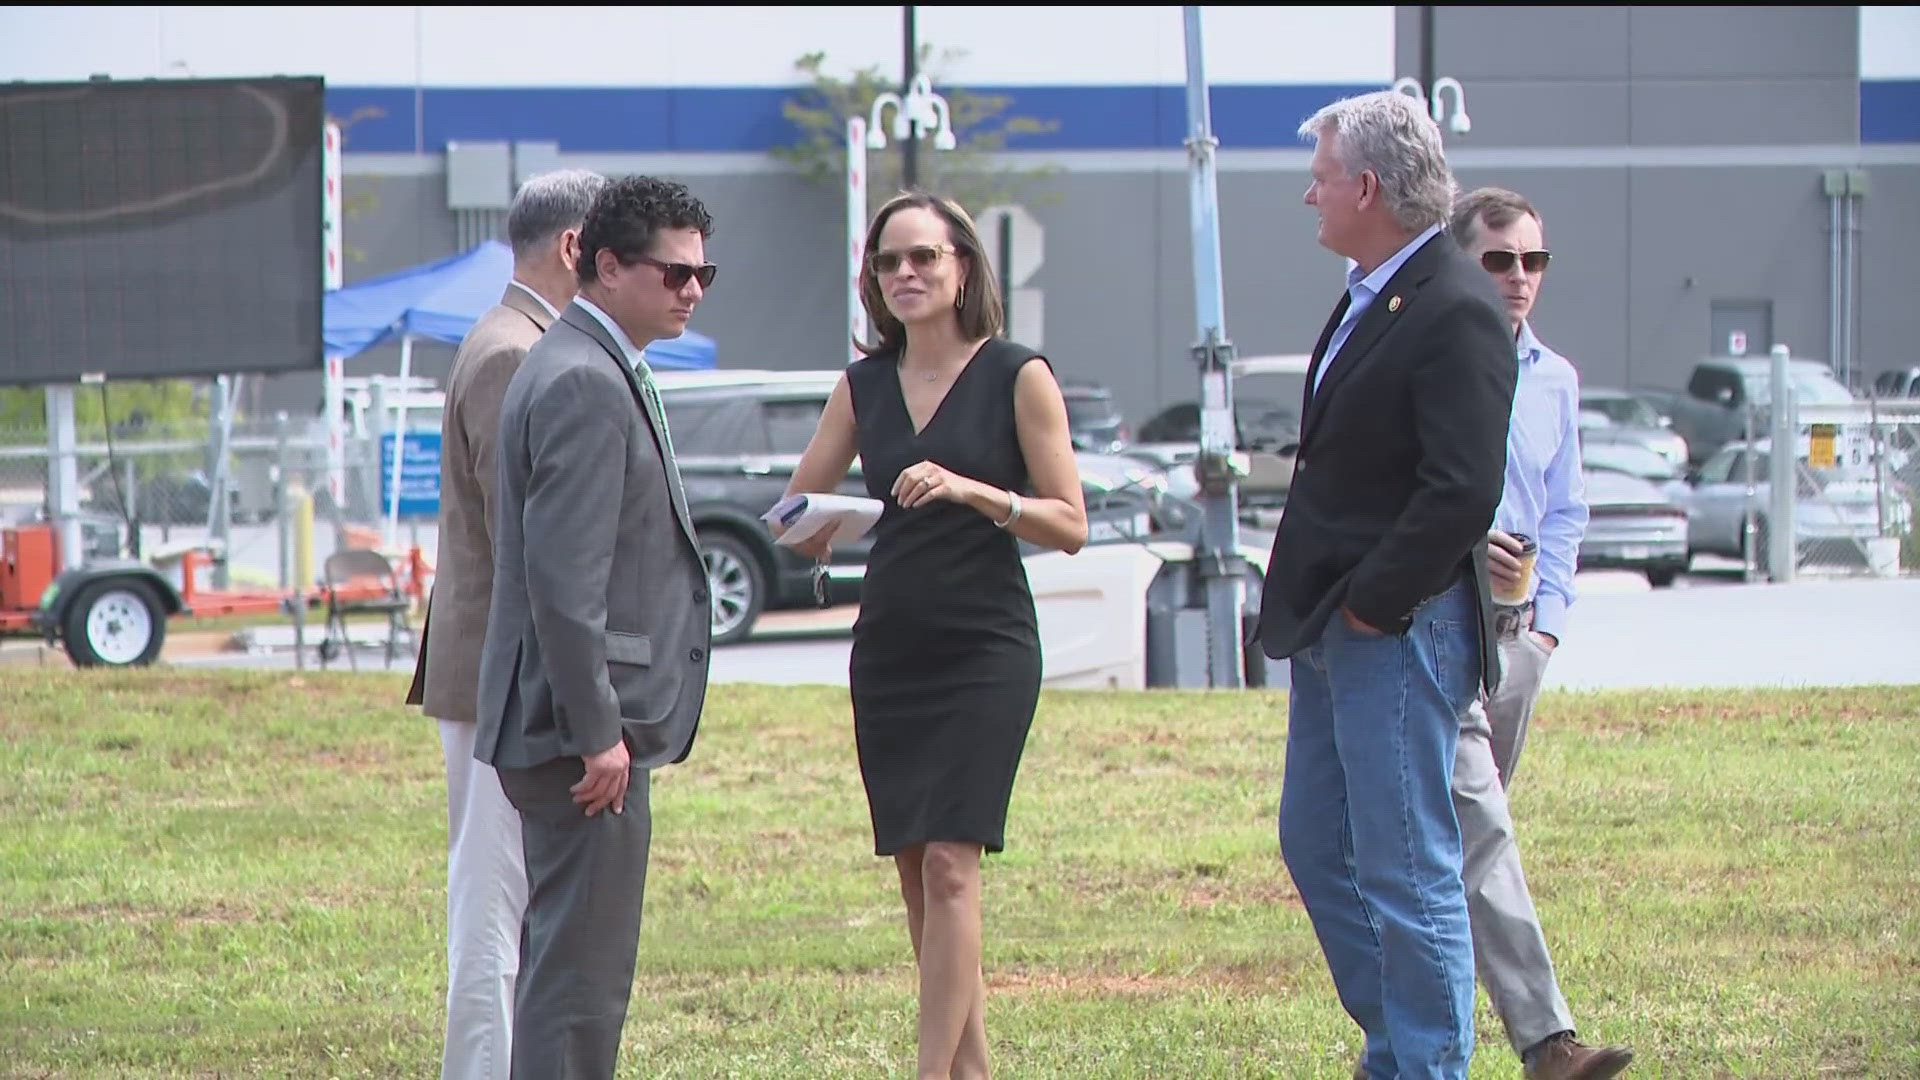 Georgia politicians toured the USPS distribution facility in Palmetto, which has been linked to months of delays and issues. The group reported hopeful outcomes.